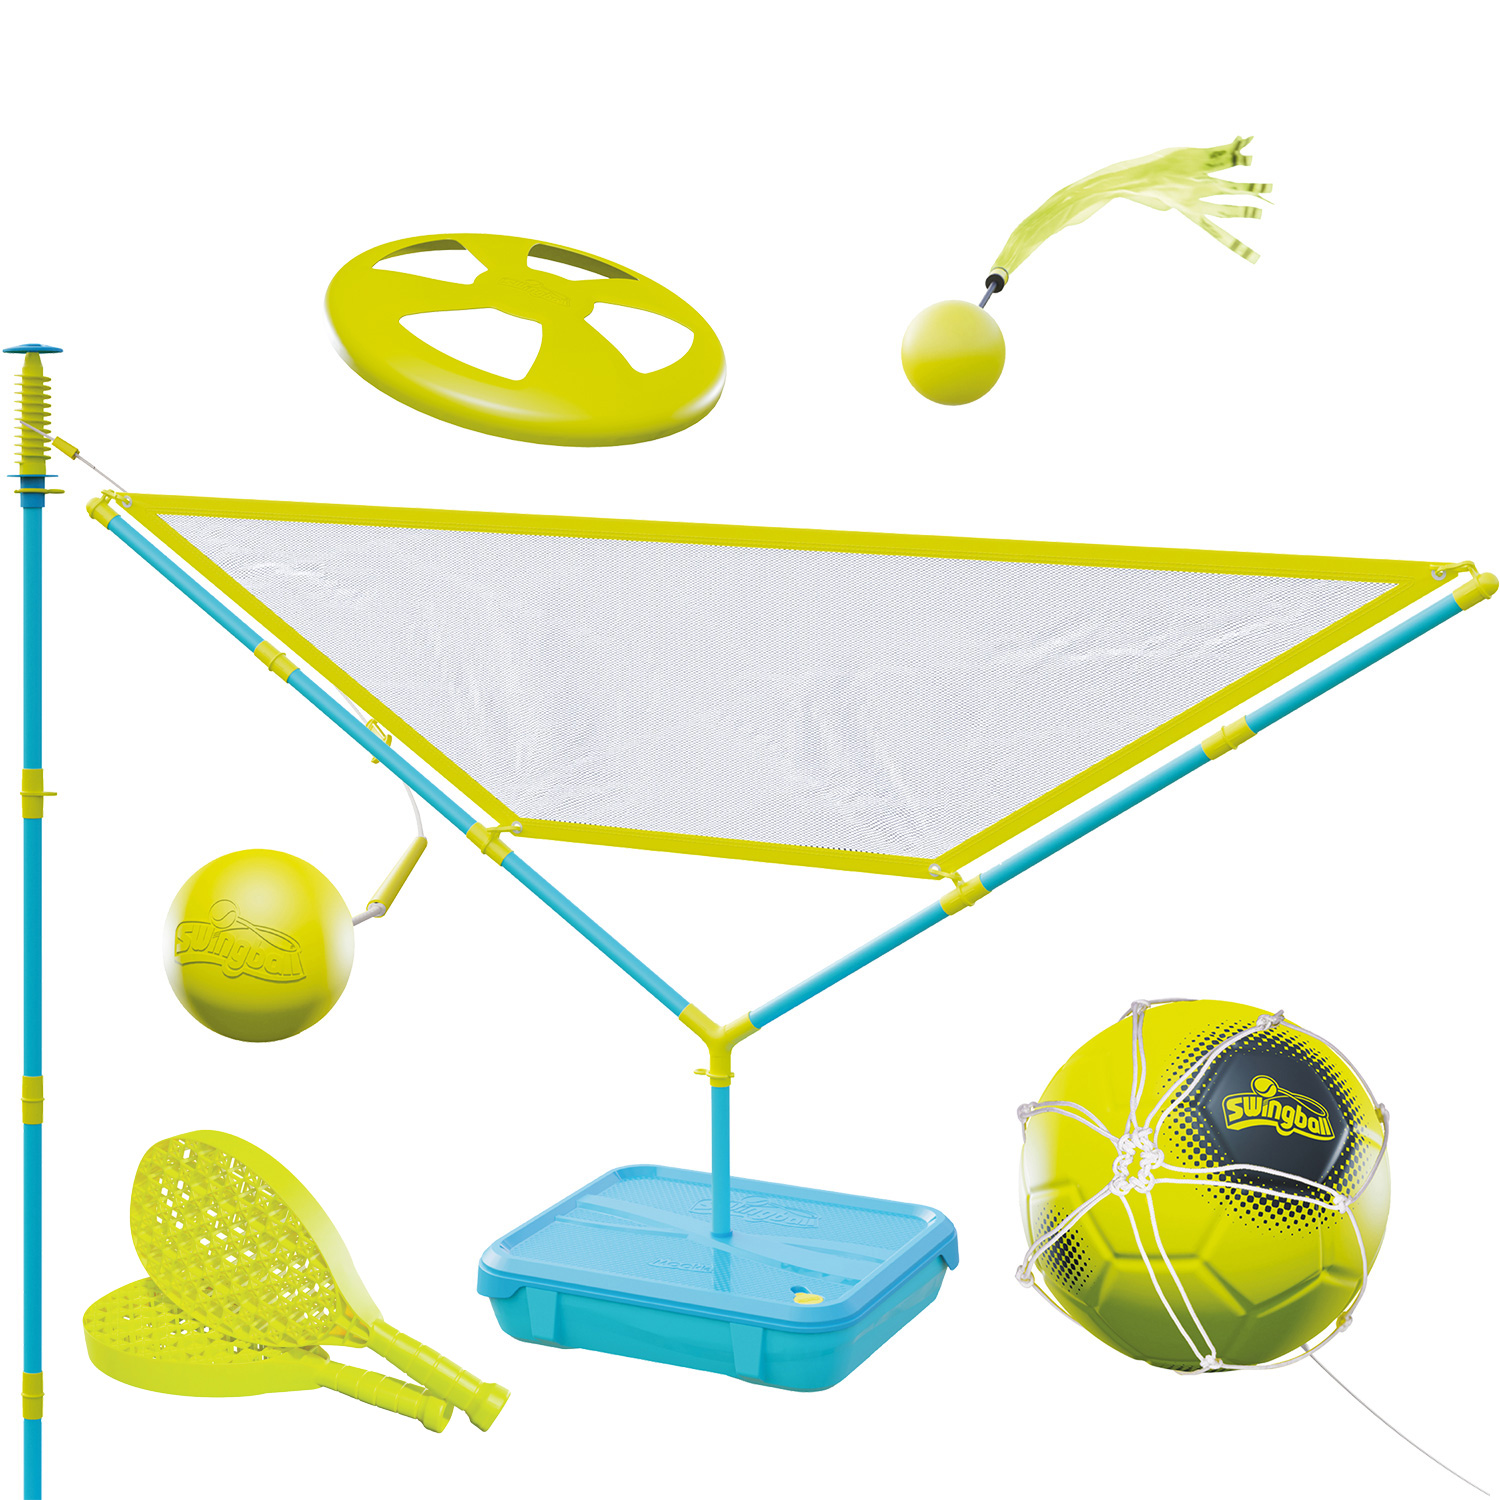 Swingball 5 in 1 multiplay all surface set